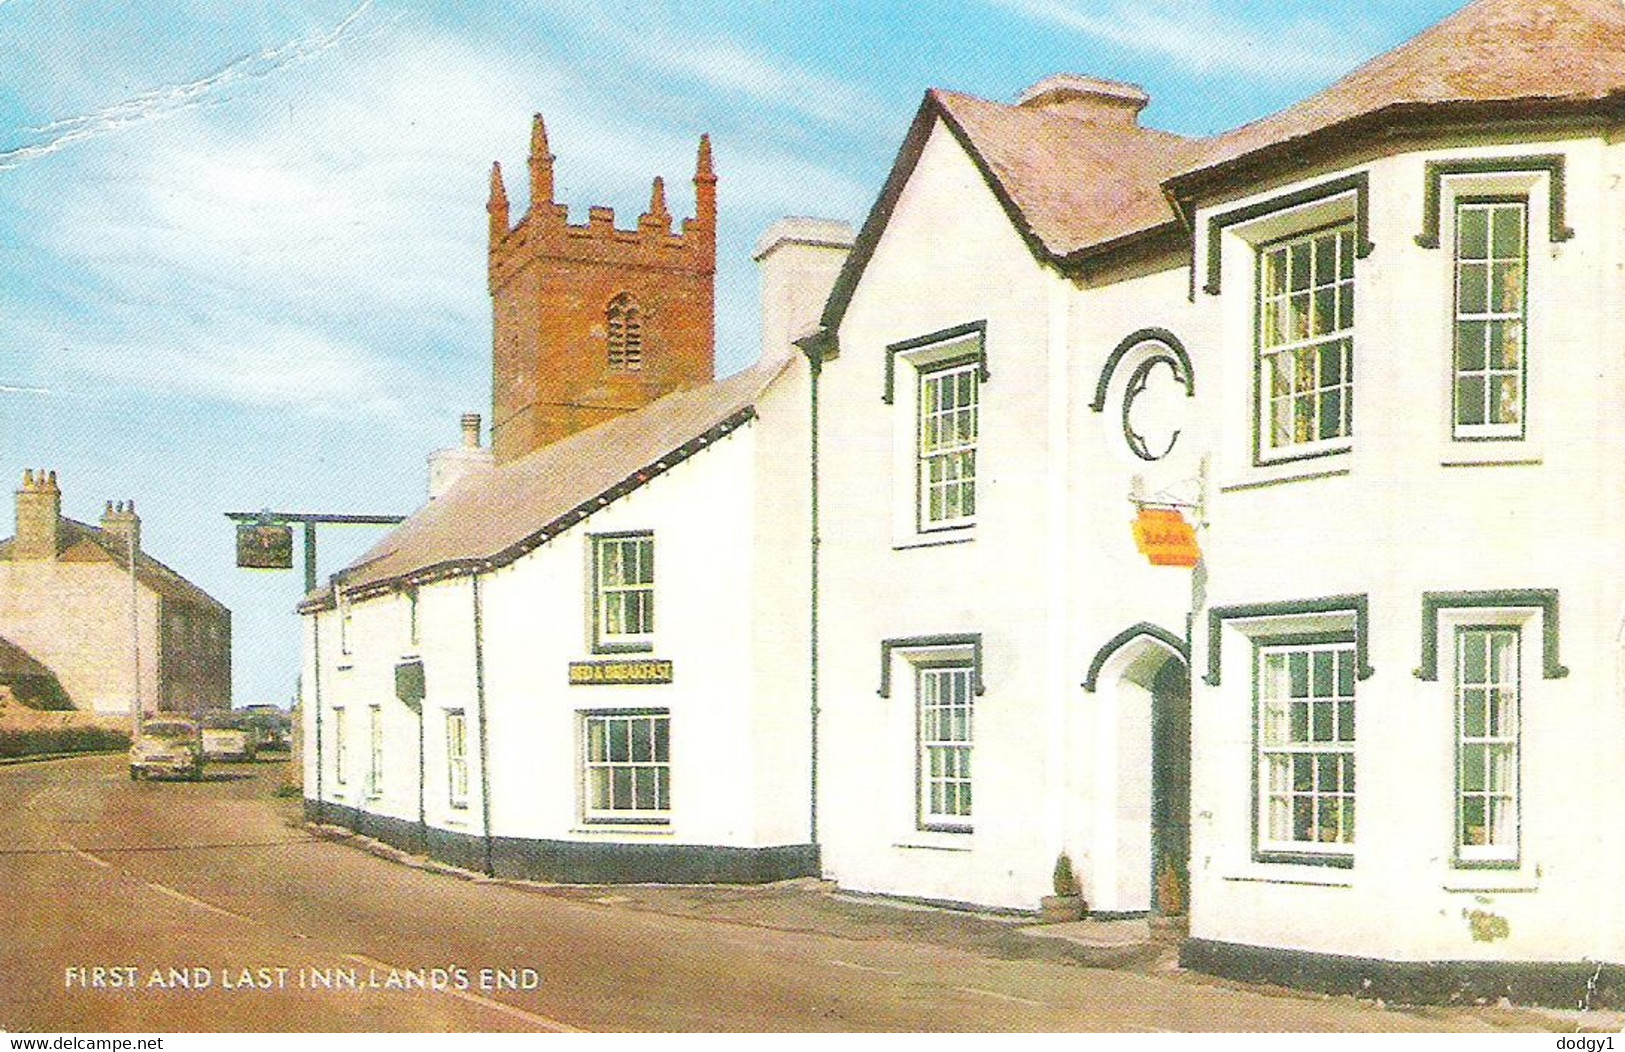 FIRST AND LAST INN, LANDS END, CORNWALL, ENGLAND. Circa 1971 USED POSTCARD. Fq3 - Land's End